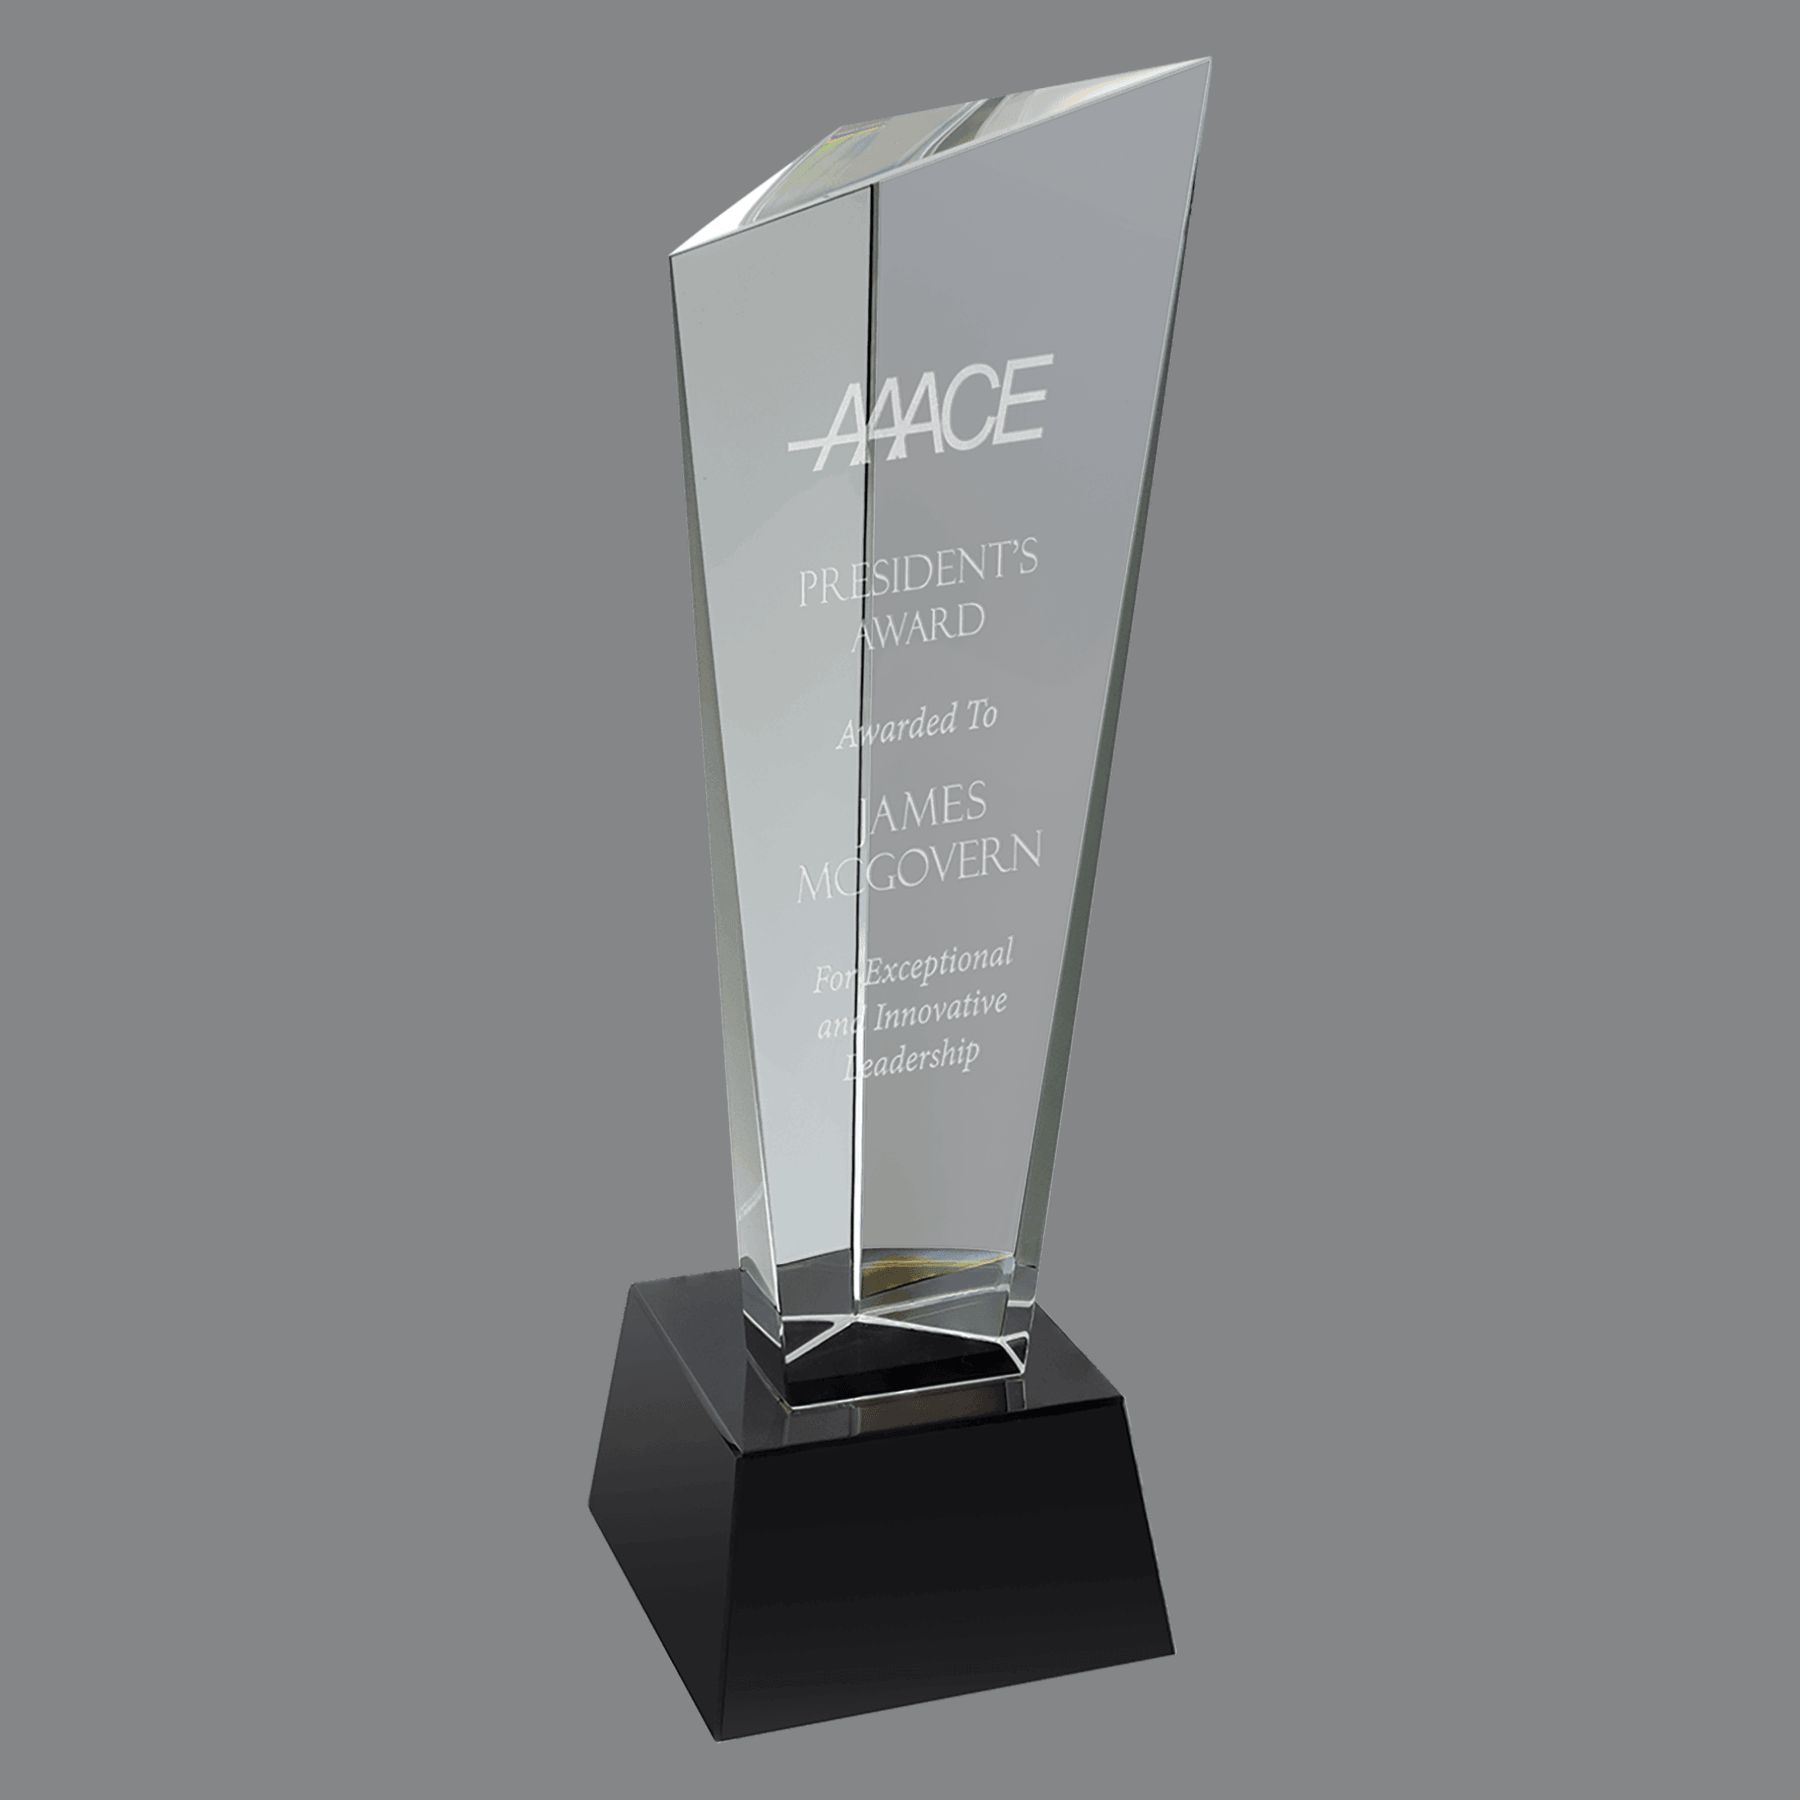 Our Rising Peak Crystal Award features a clear piece of crystal for laser engraving personalization. One side rises higher than the others, giving the award the rising peak look. It's mounted on a black crystal base. This CRY23010L stands 11" tall, weighs 5.6 lbs & comes in a deluxe gift box.